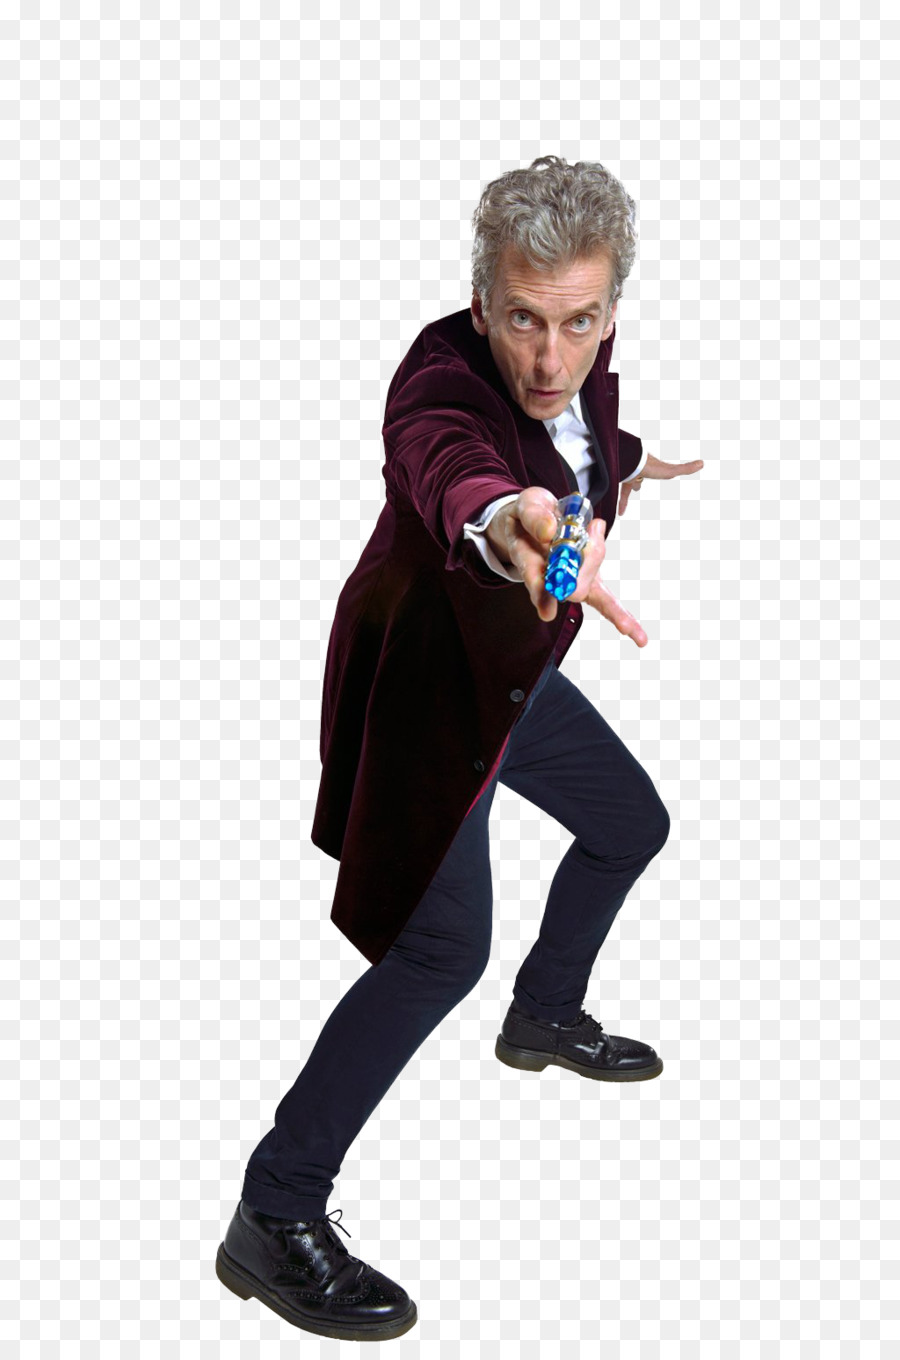 Twelfth Doctor Doctor Who Tenth Doctor Peter Capaldi - doctor who png download - 1024*1539 - Free Transparent Twelfth Doctor png Download.